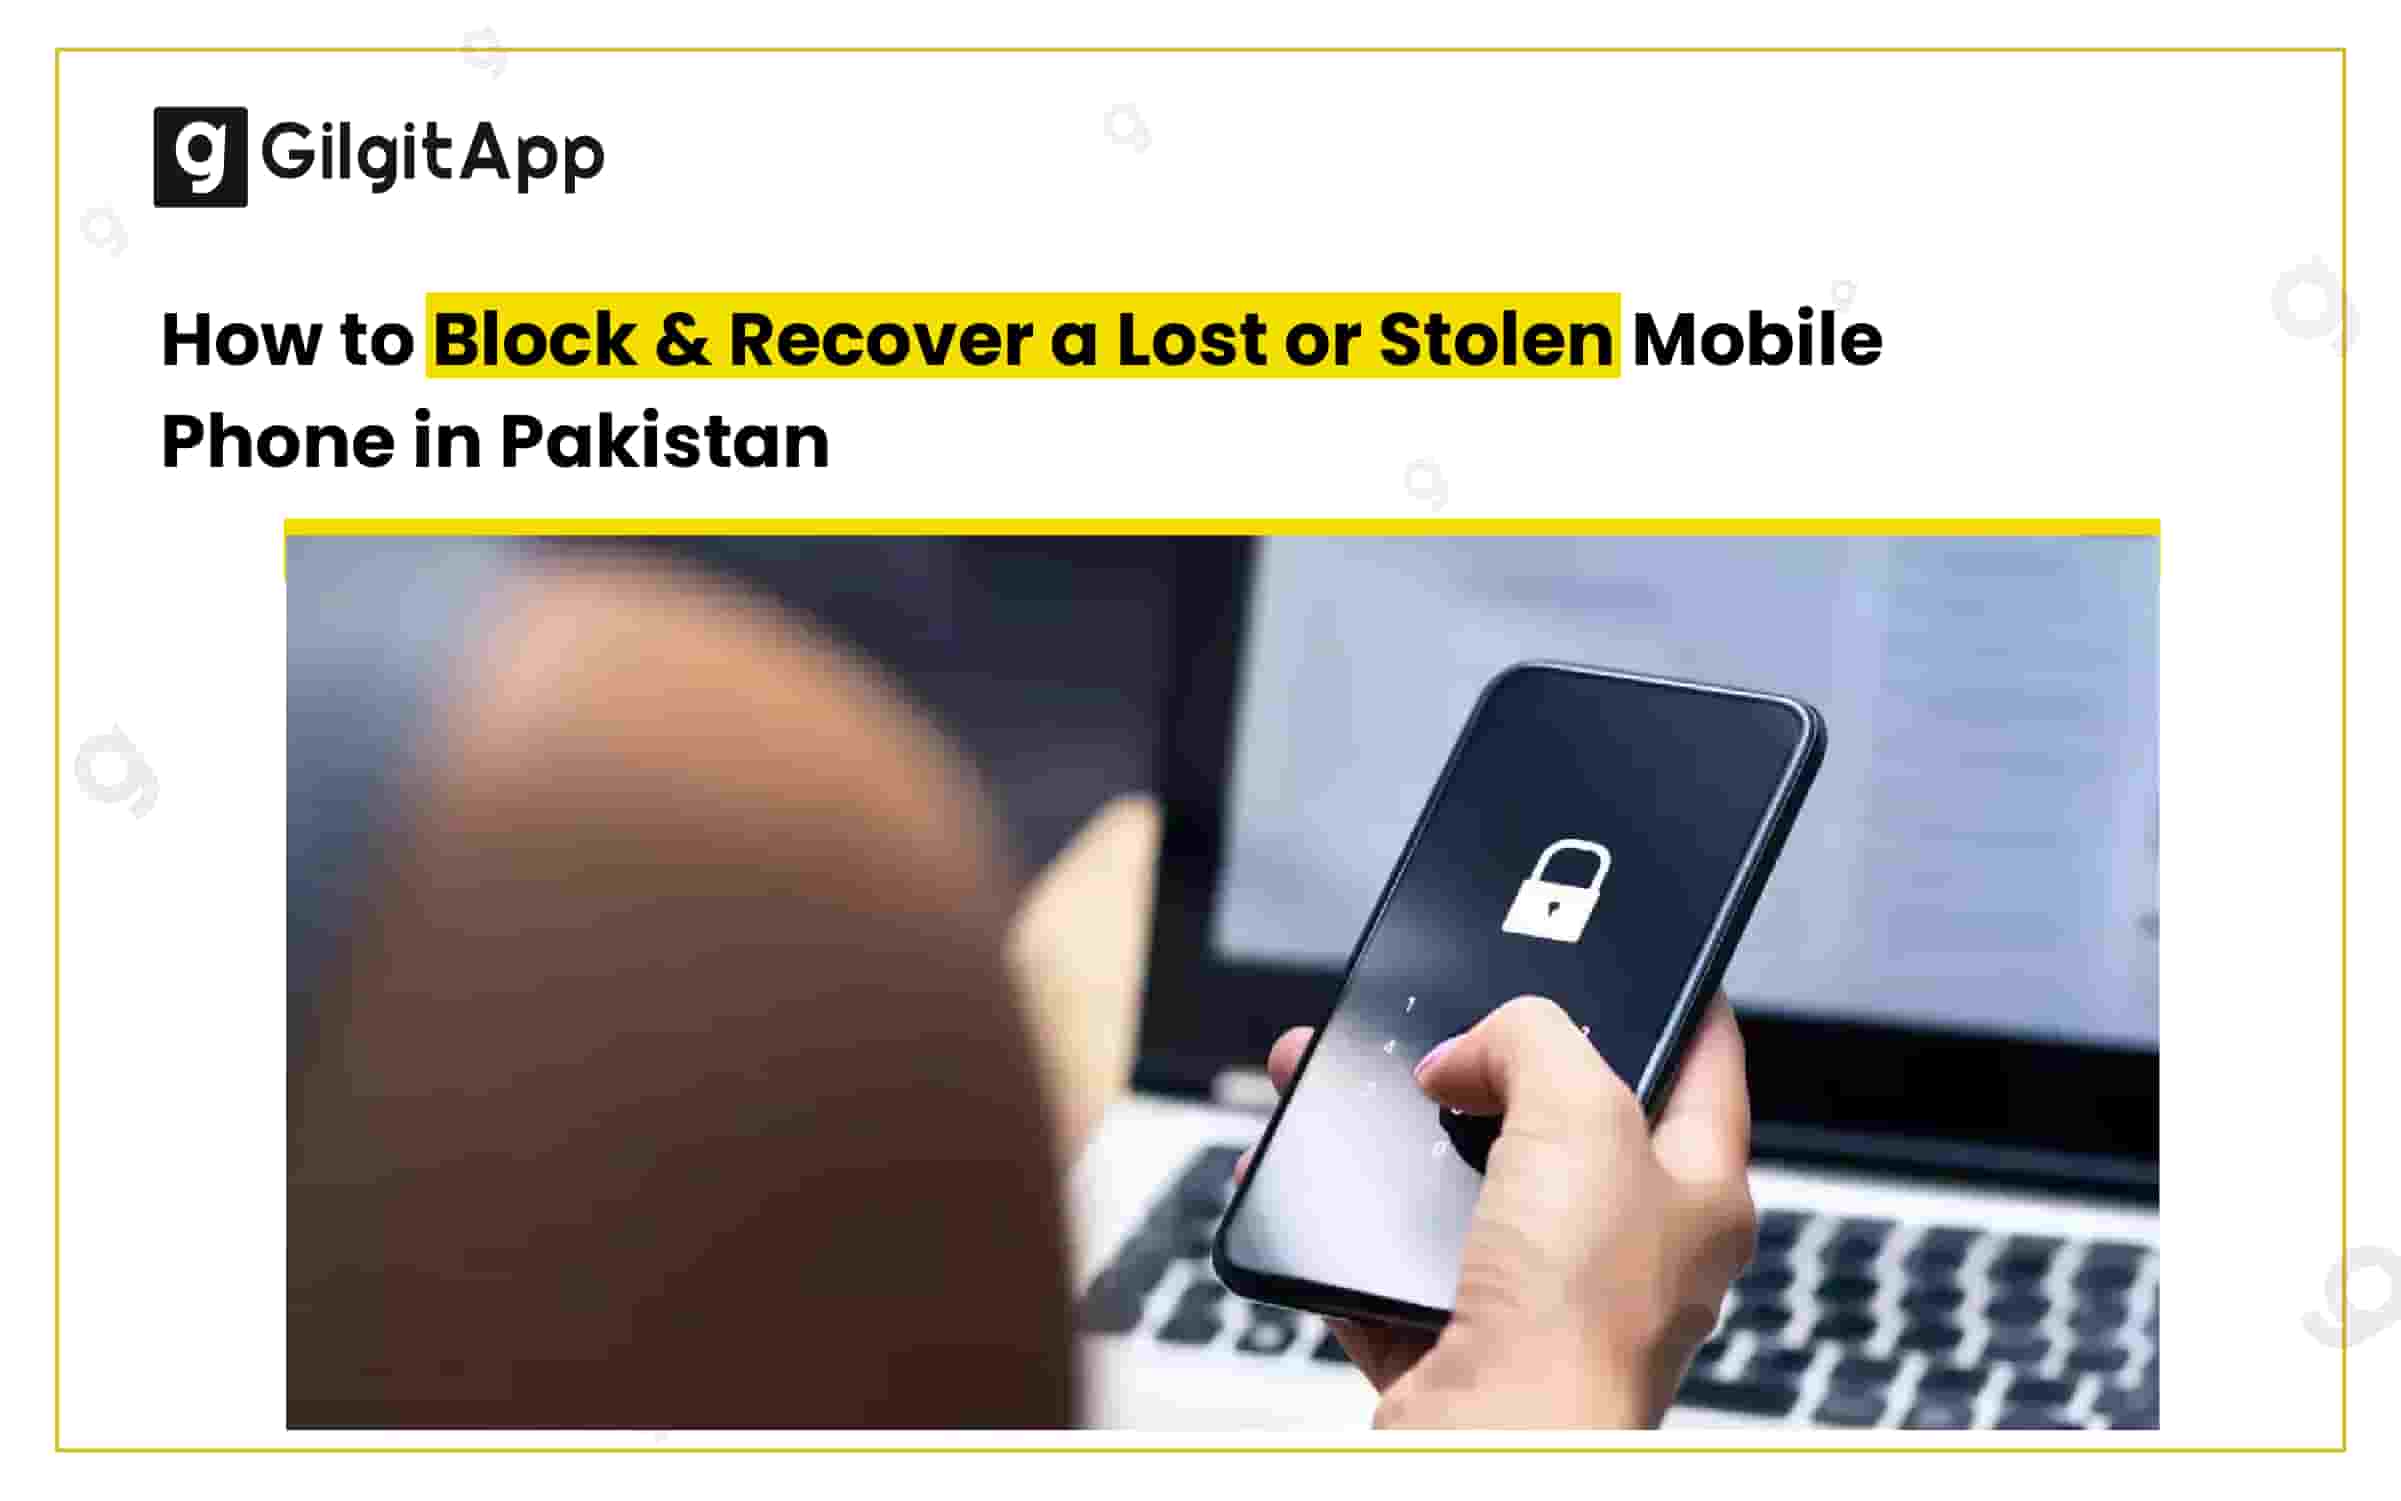 How to Block & Recover a Lost or Stolen Mobile Phone in Pakistan